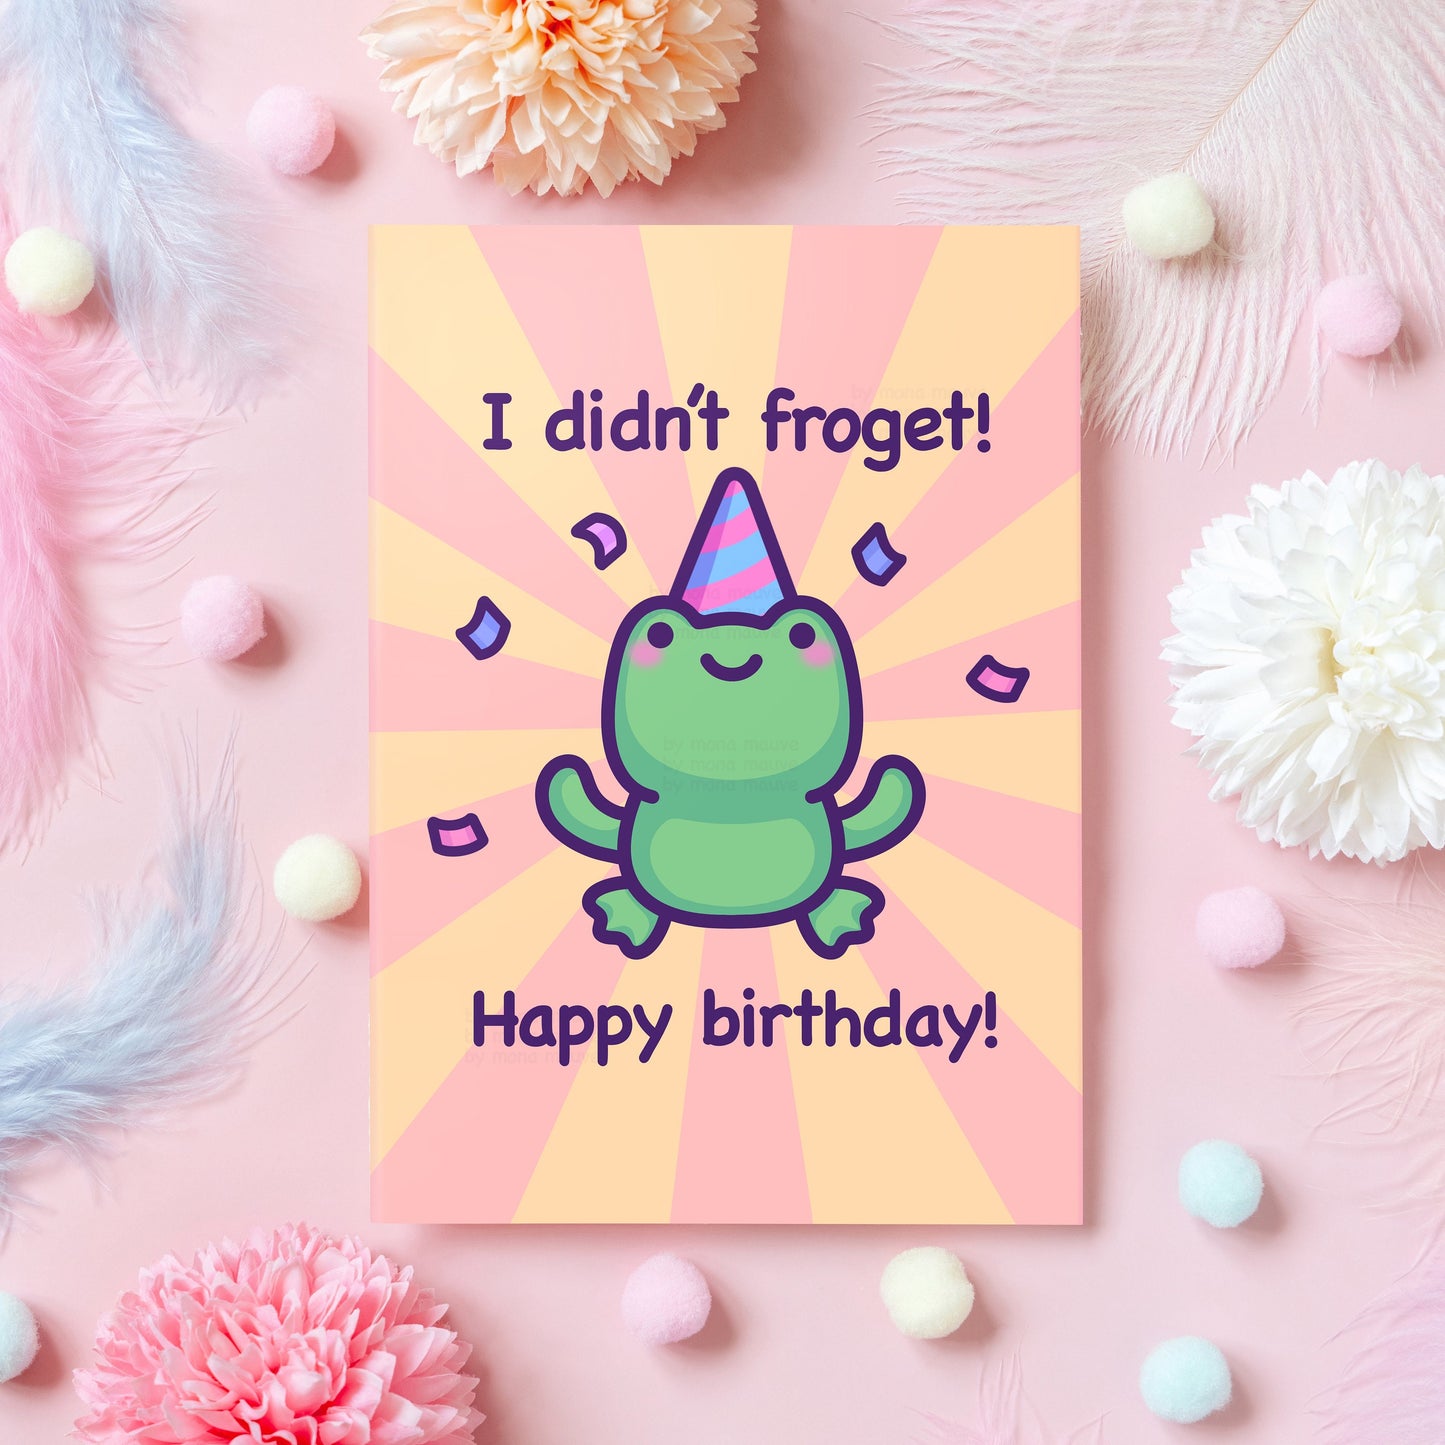 Cute Frog Birthday Card | I Didn't Froget! | Funny Pun Happy Birthday Card | Gift for Husband, Wife, Boyfriend, Girlfriend, Mom - Her or Him